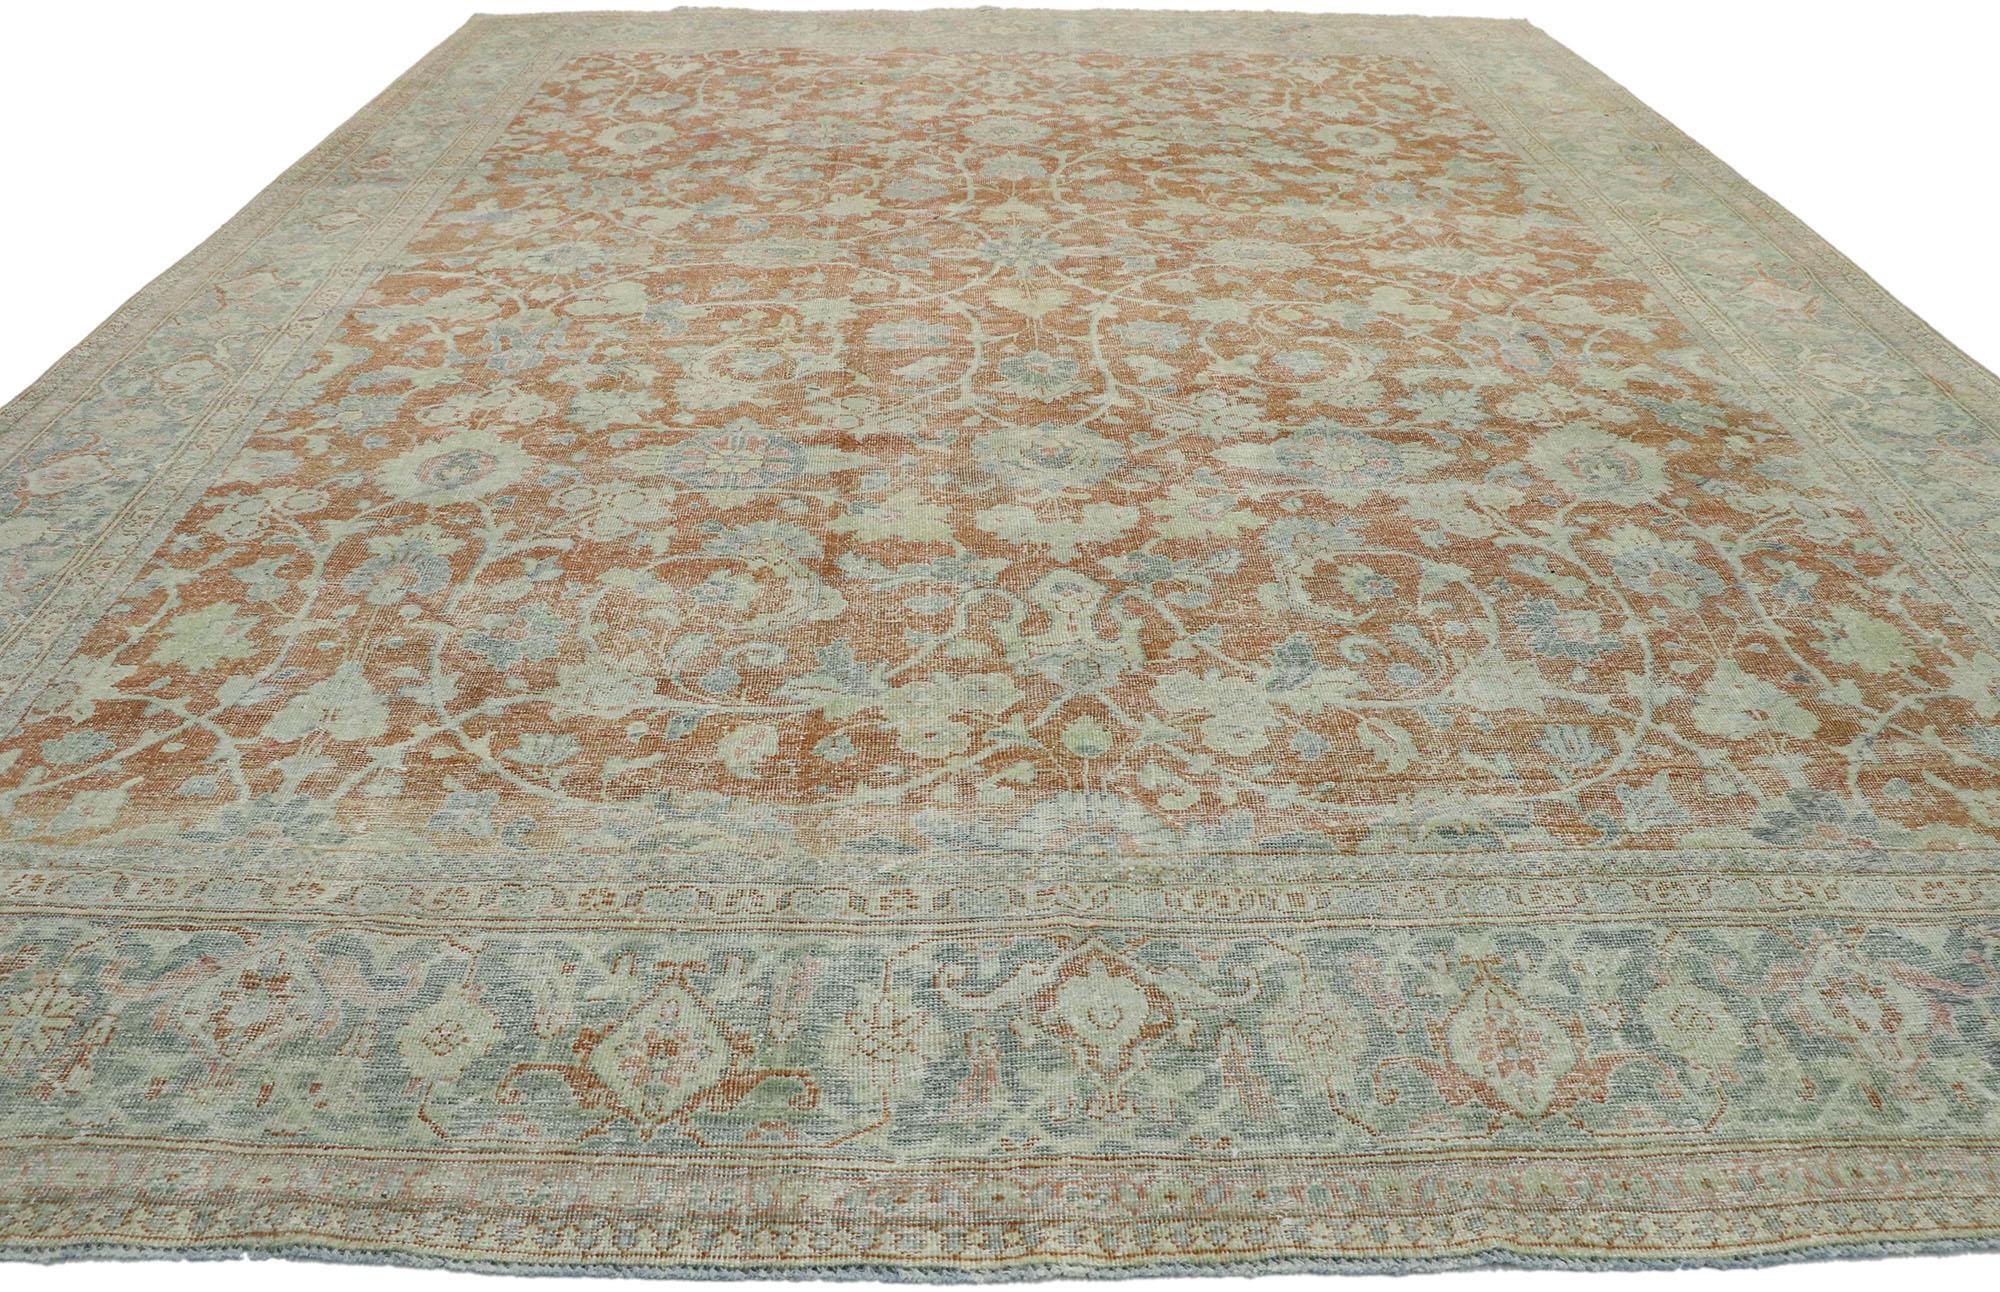 Tabriz Distressed Antique Persian Mahal Rug with Relaxed Southern Living Style For Sale